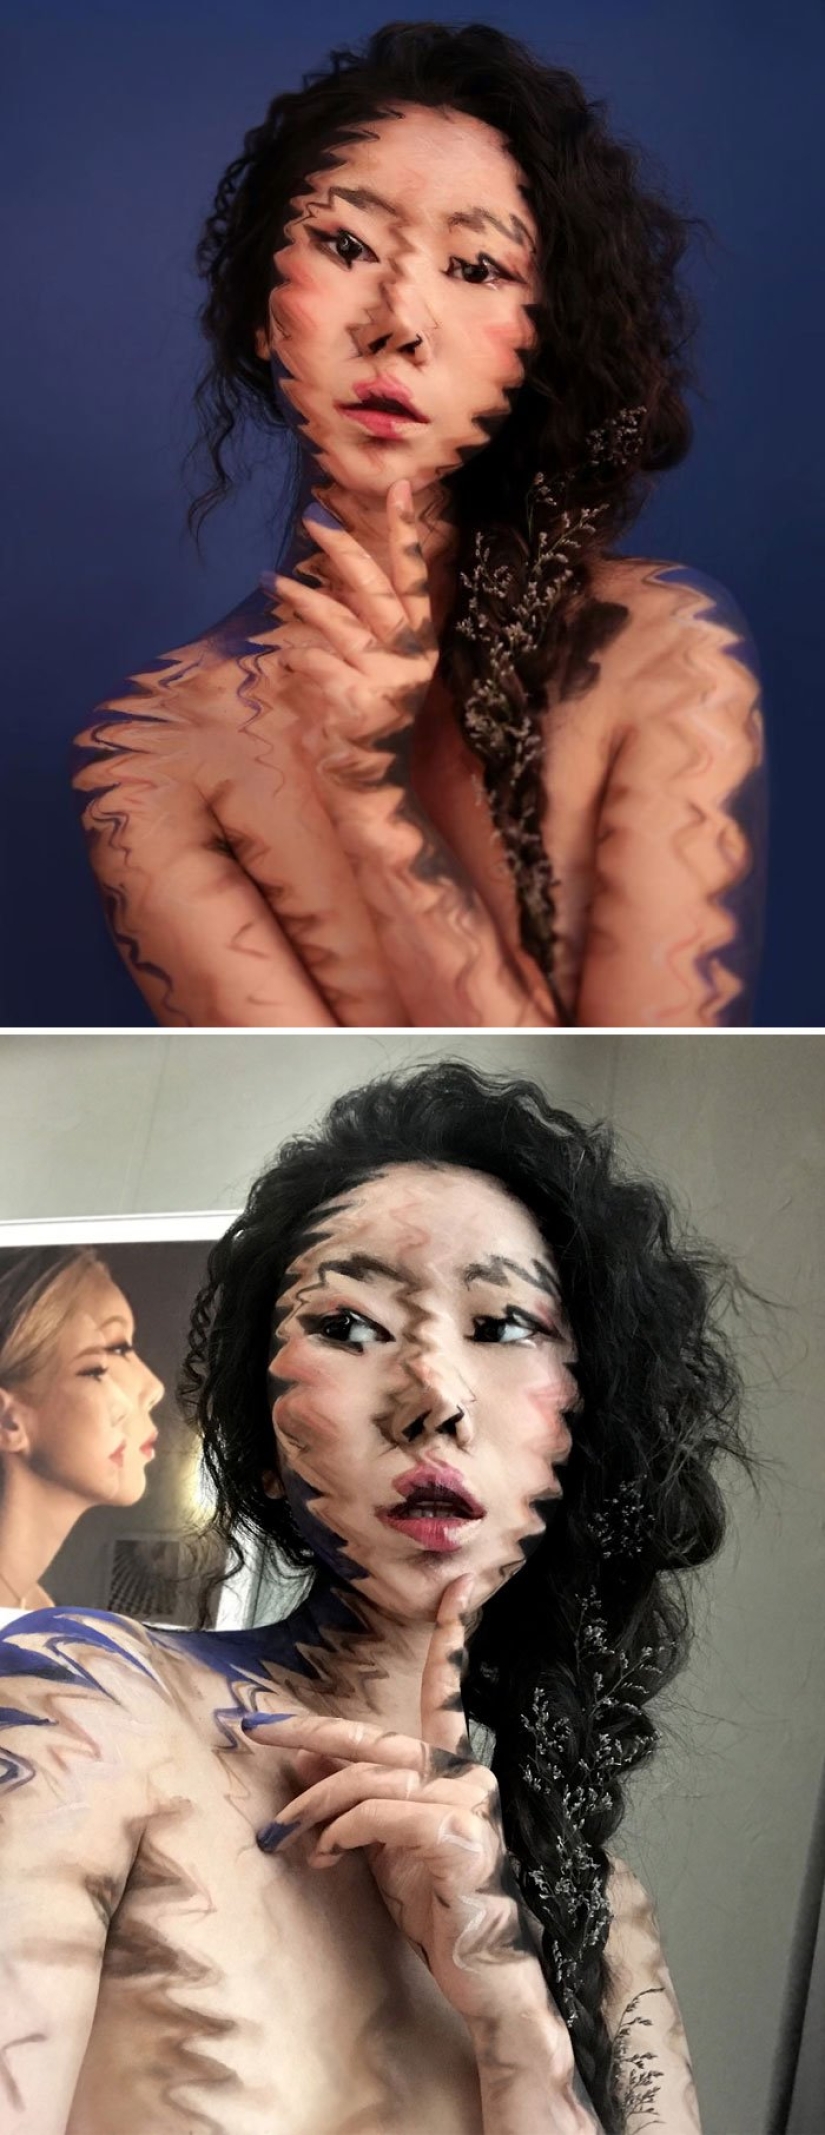 Deception on the face: a Korean woman draws mind-blowing optical illusions